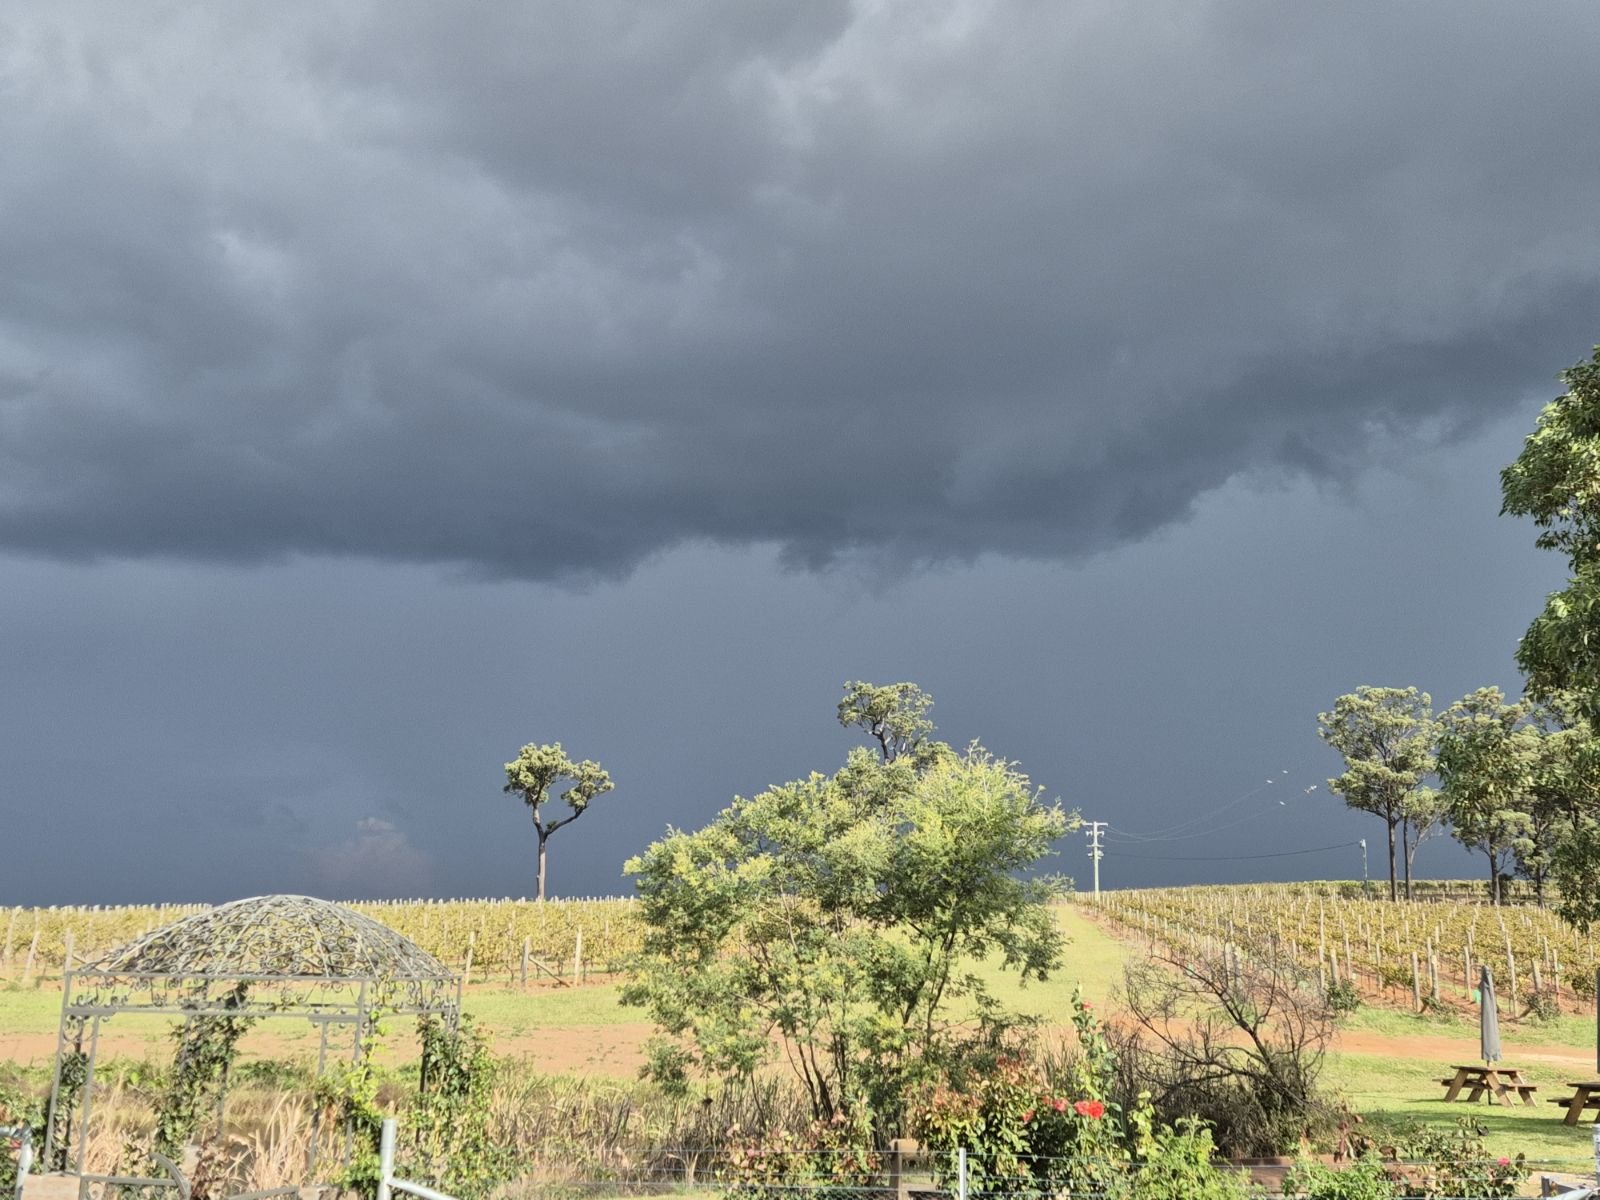 Watching the Storms roll in over the vines and veggie garden. Such an amazing time of year with the changes in weather.

 #huntervalleywinecountry #stormclouds #vineyardstorm